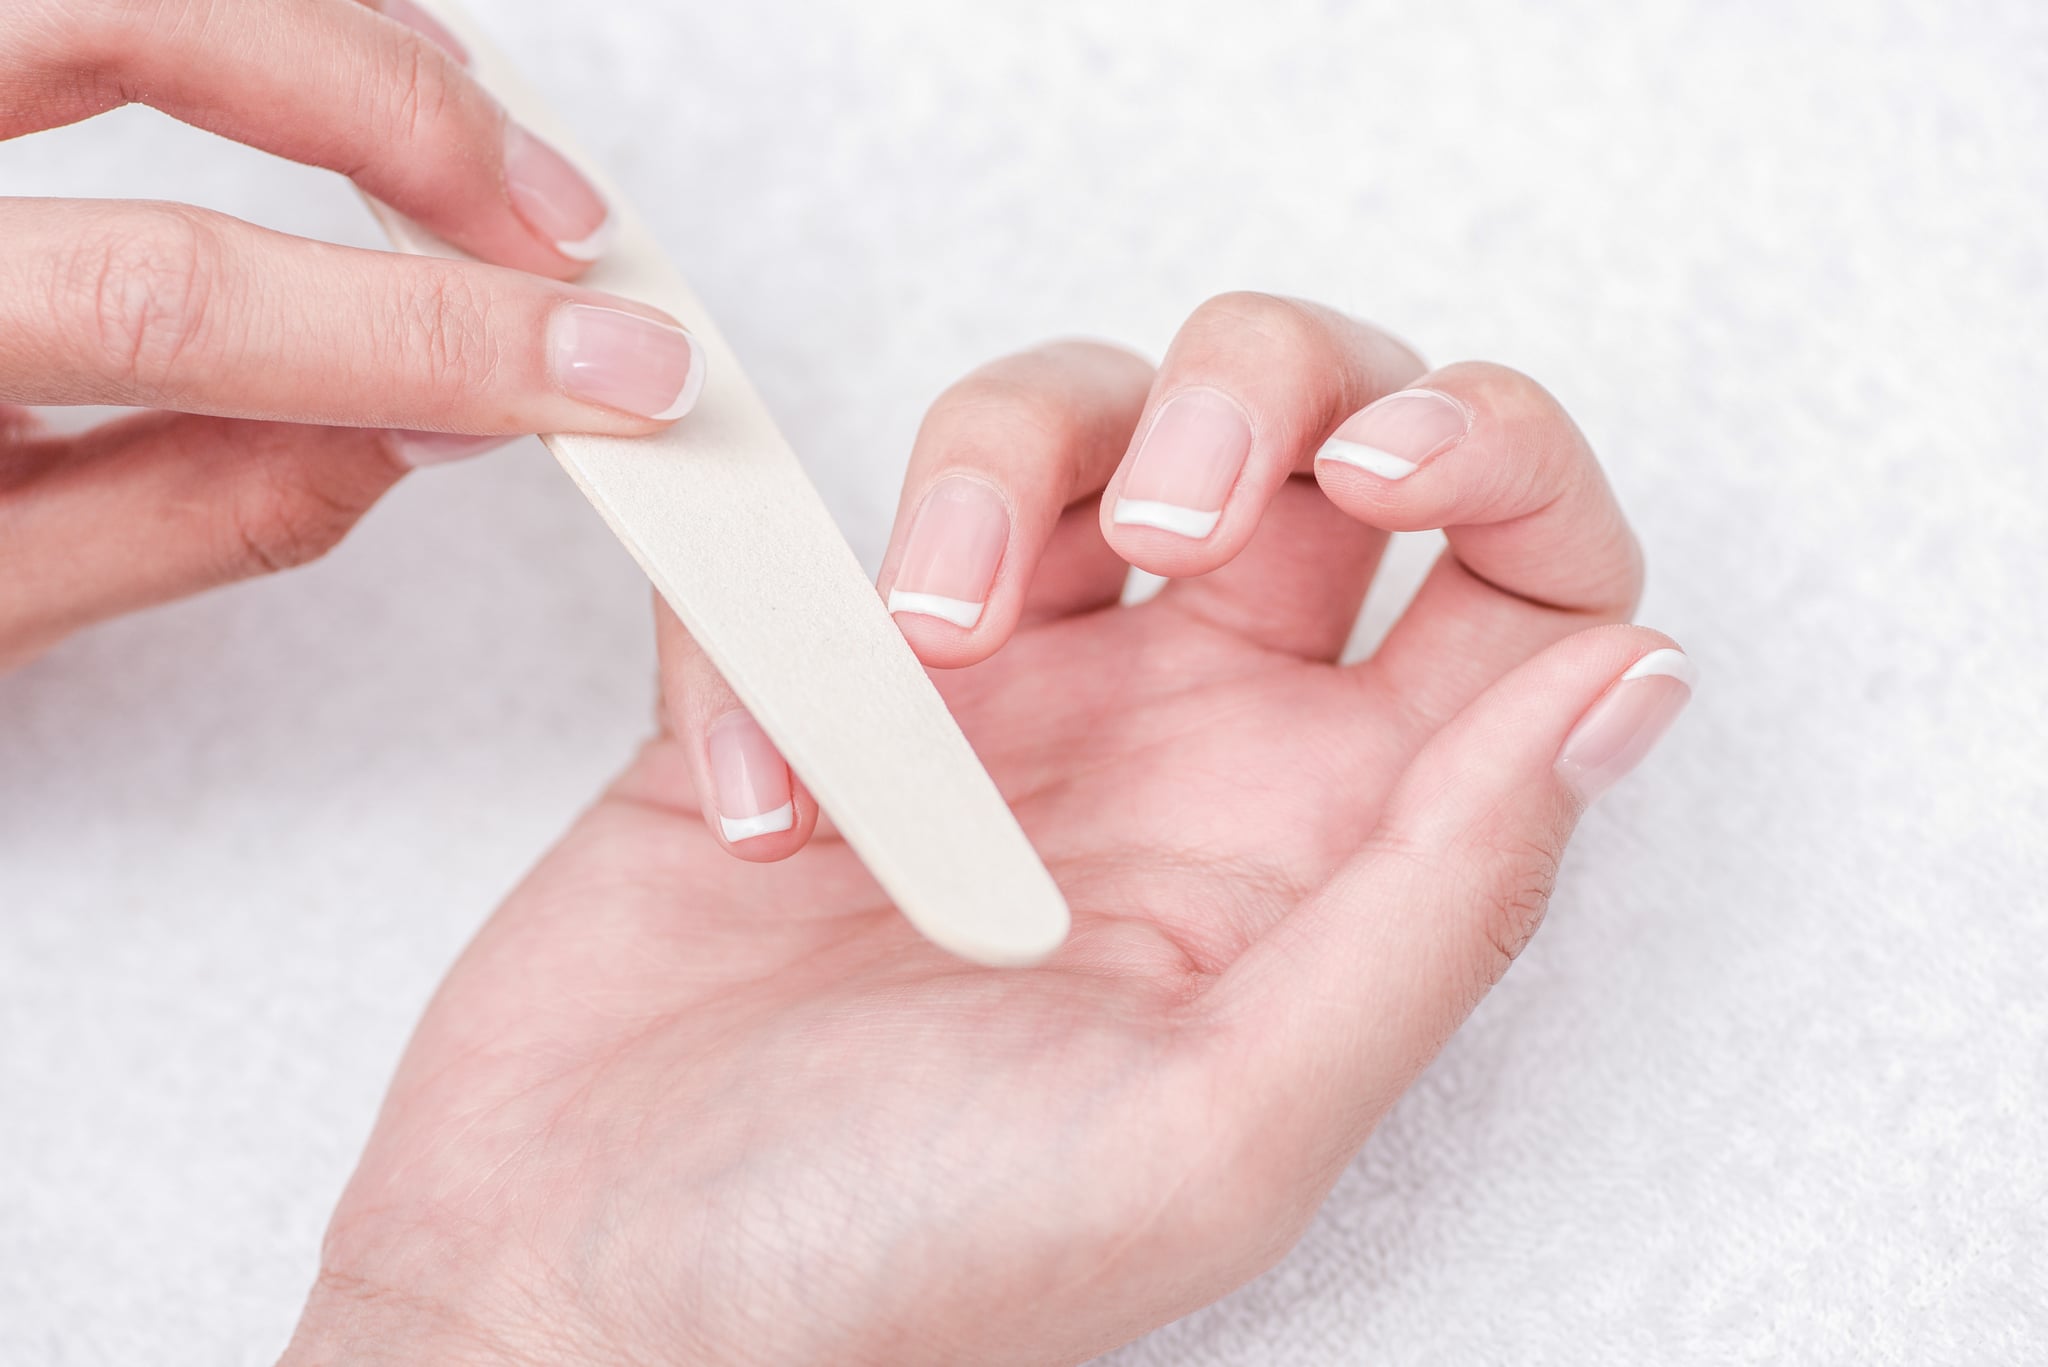 Nails With White Spots: Causes and How to Treat | POPSUGAR Beauty